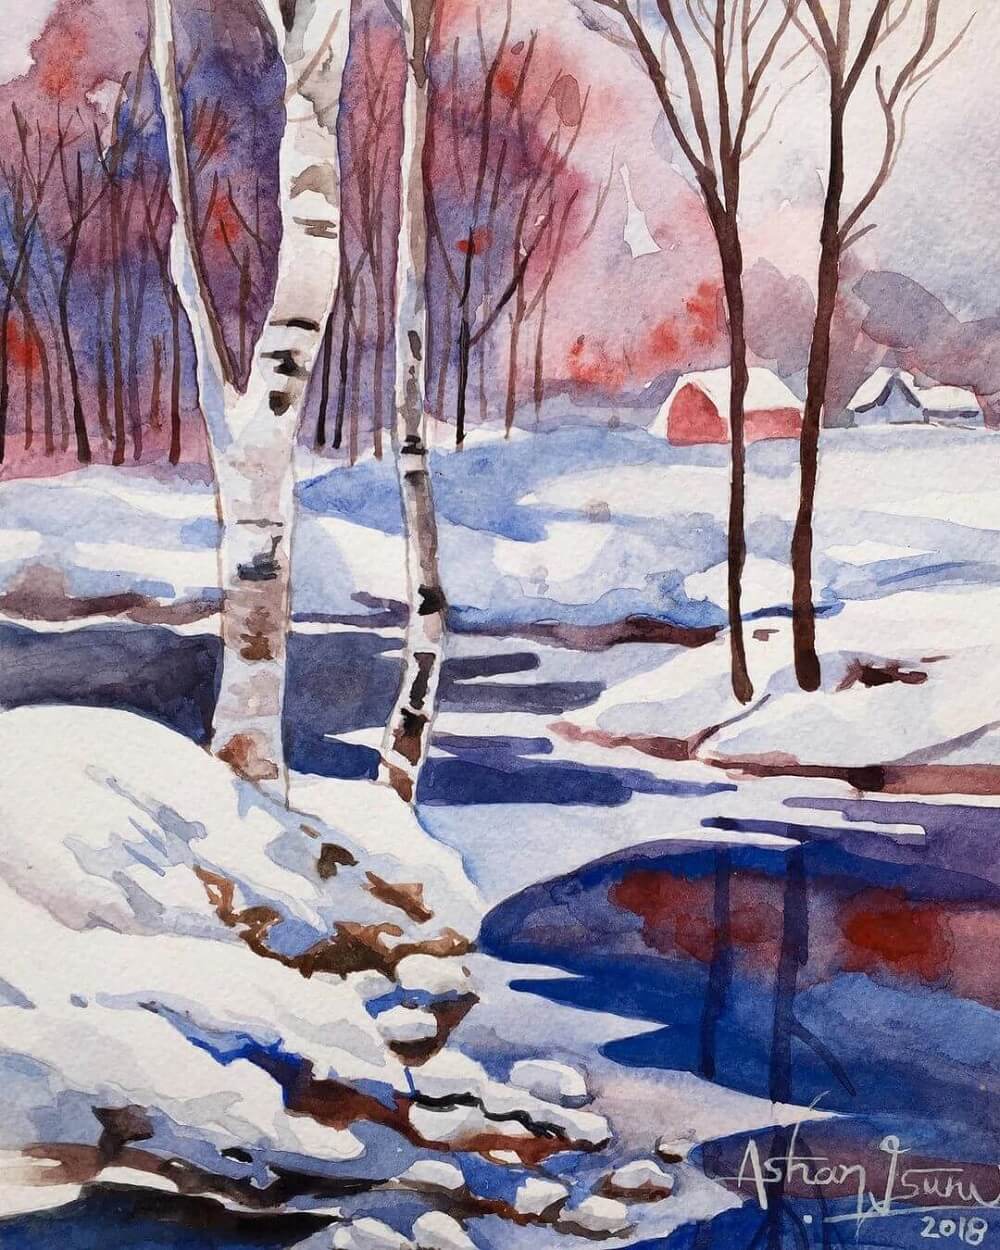 Painting of a winter scene in blue and red with a small house in the background.